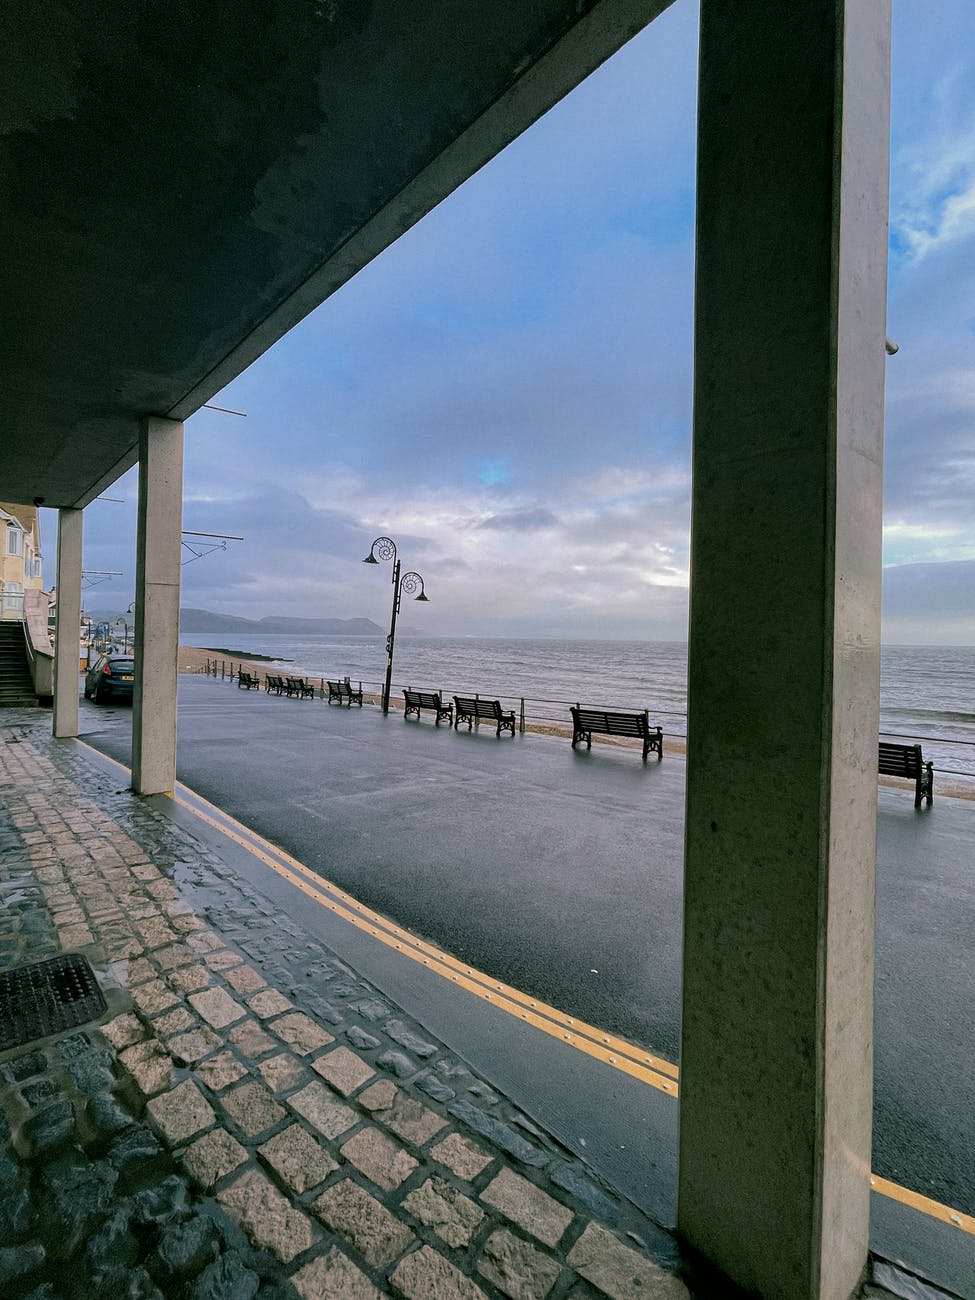 embankment with pillars near road with benches near sea